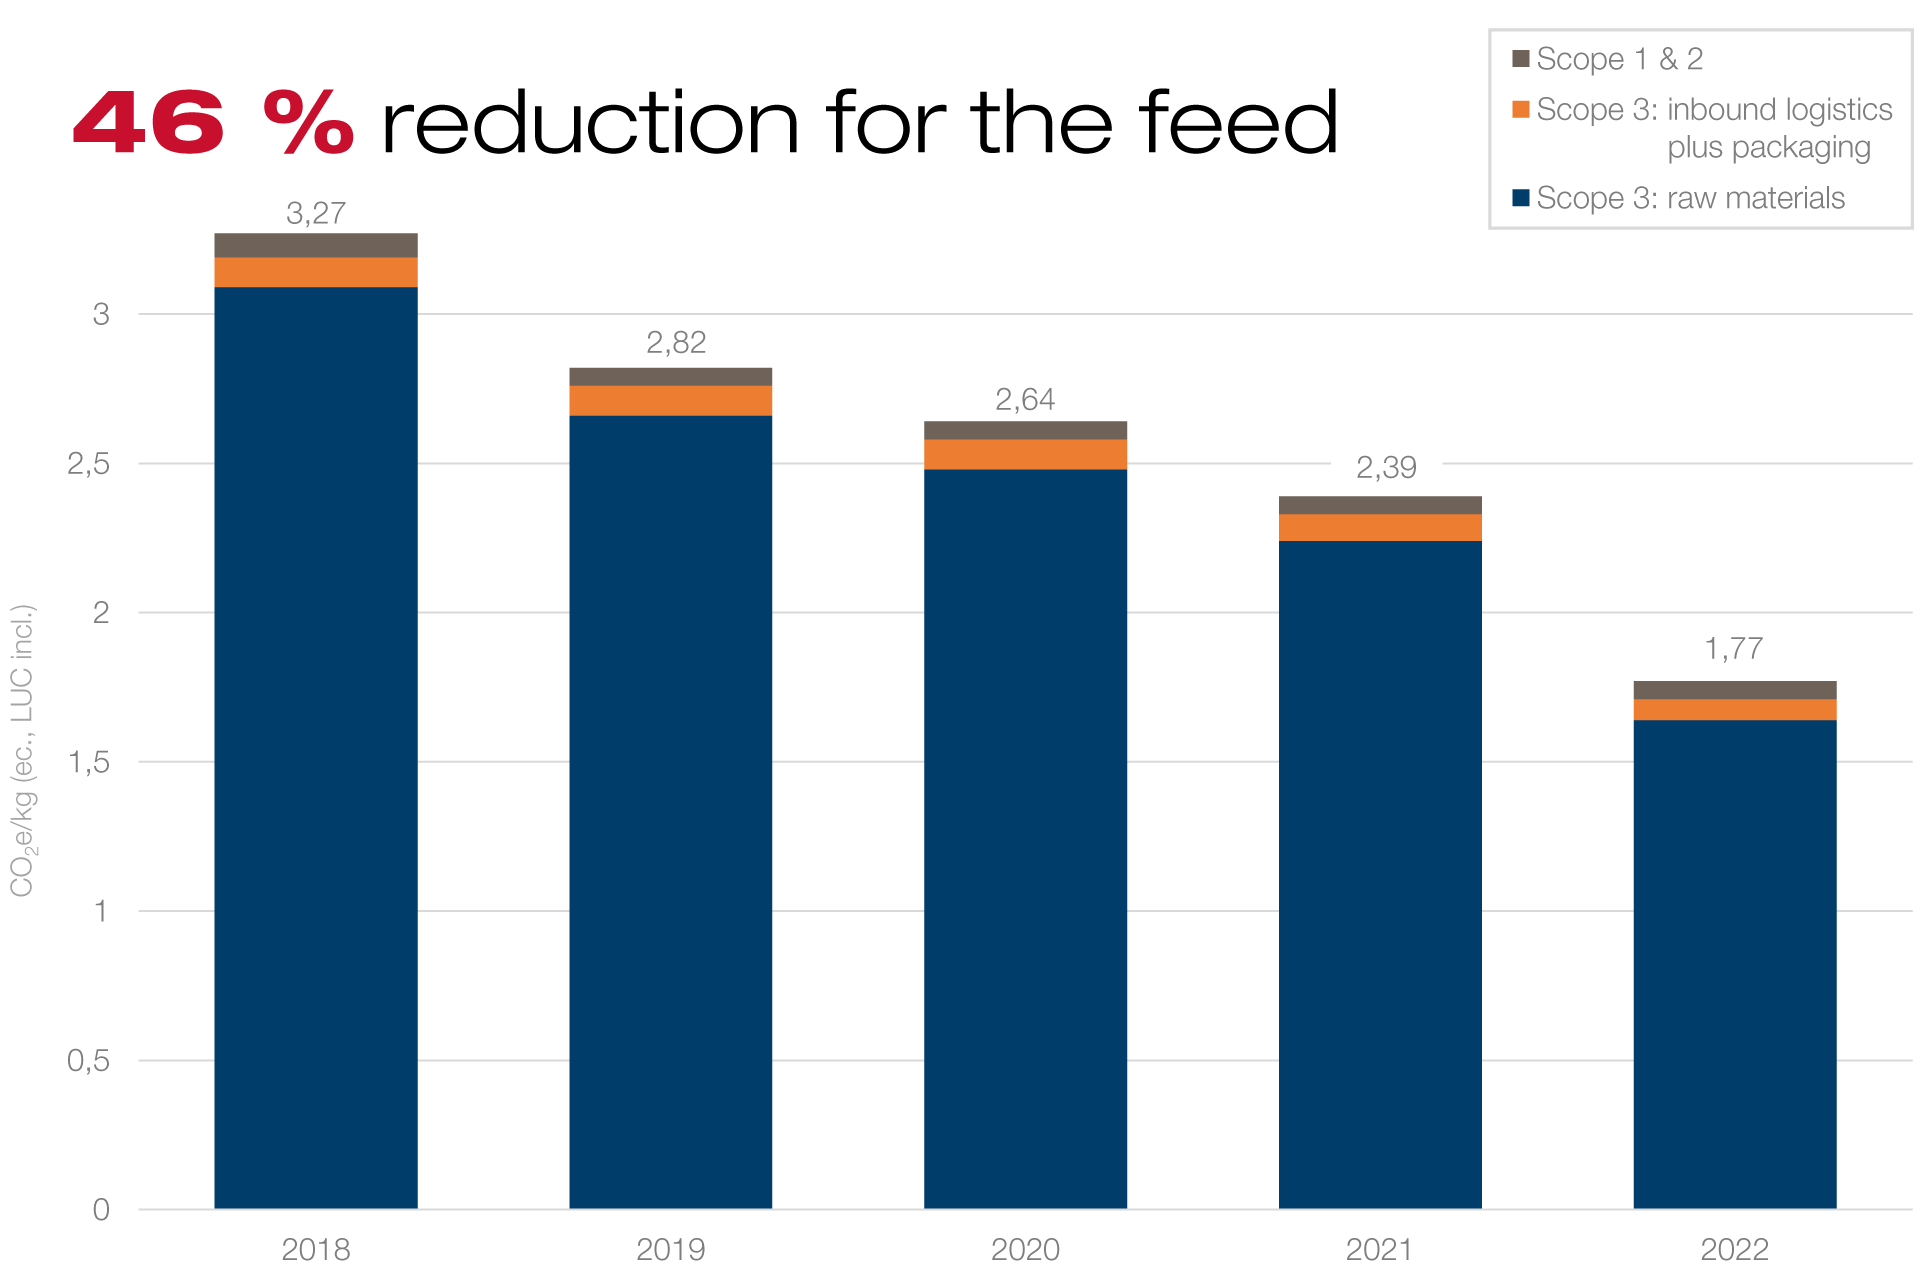 Development of GHG emssions per kg feed from 2018-2022